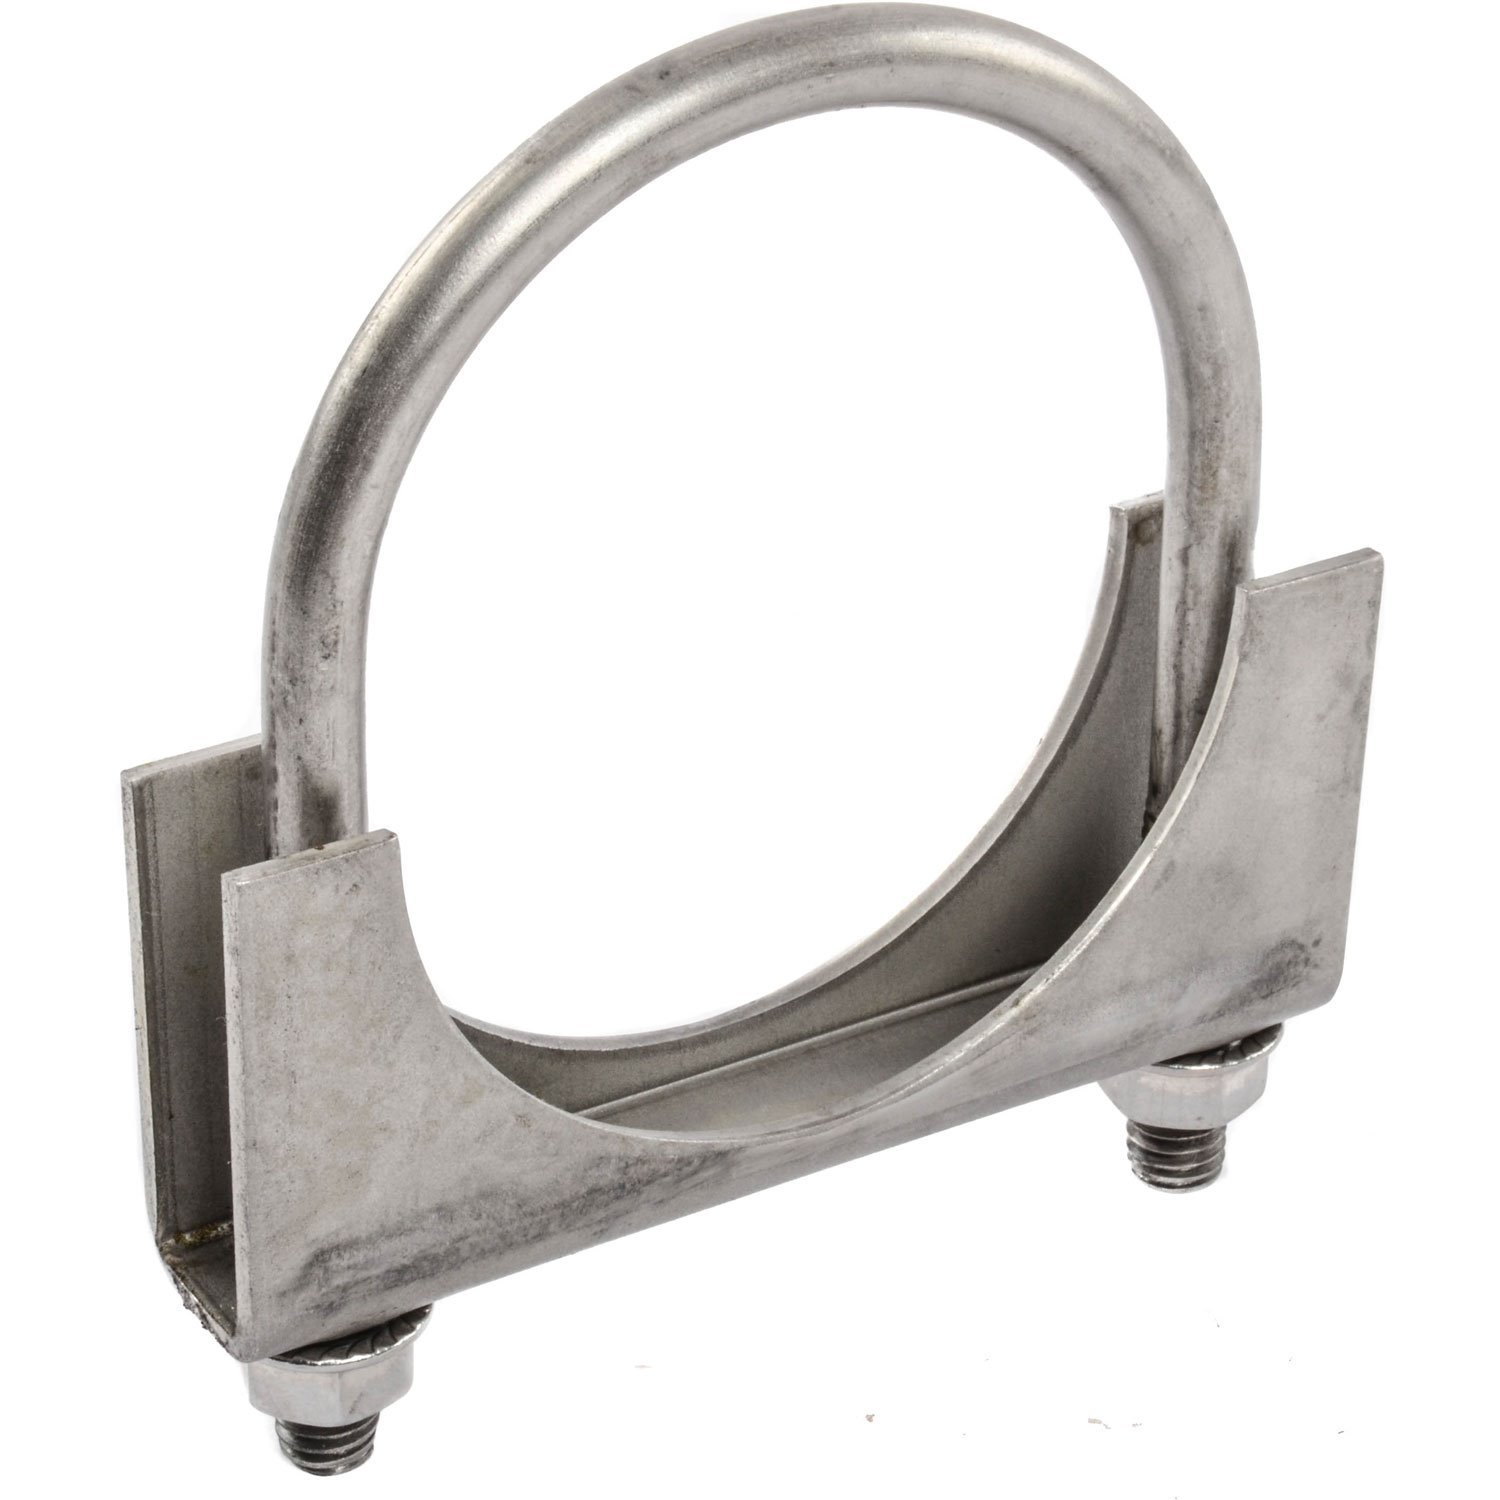 Stainless Steel HD U Clamp | Buy a 3 Inch Pipe Clamp & U-Clamp Online - JEGS